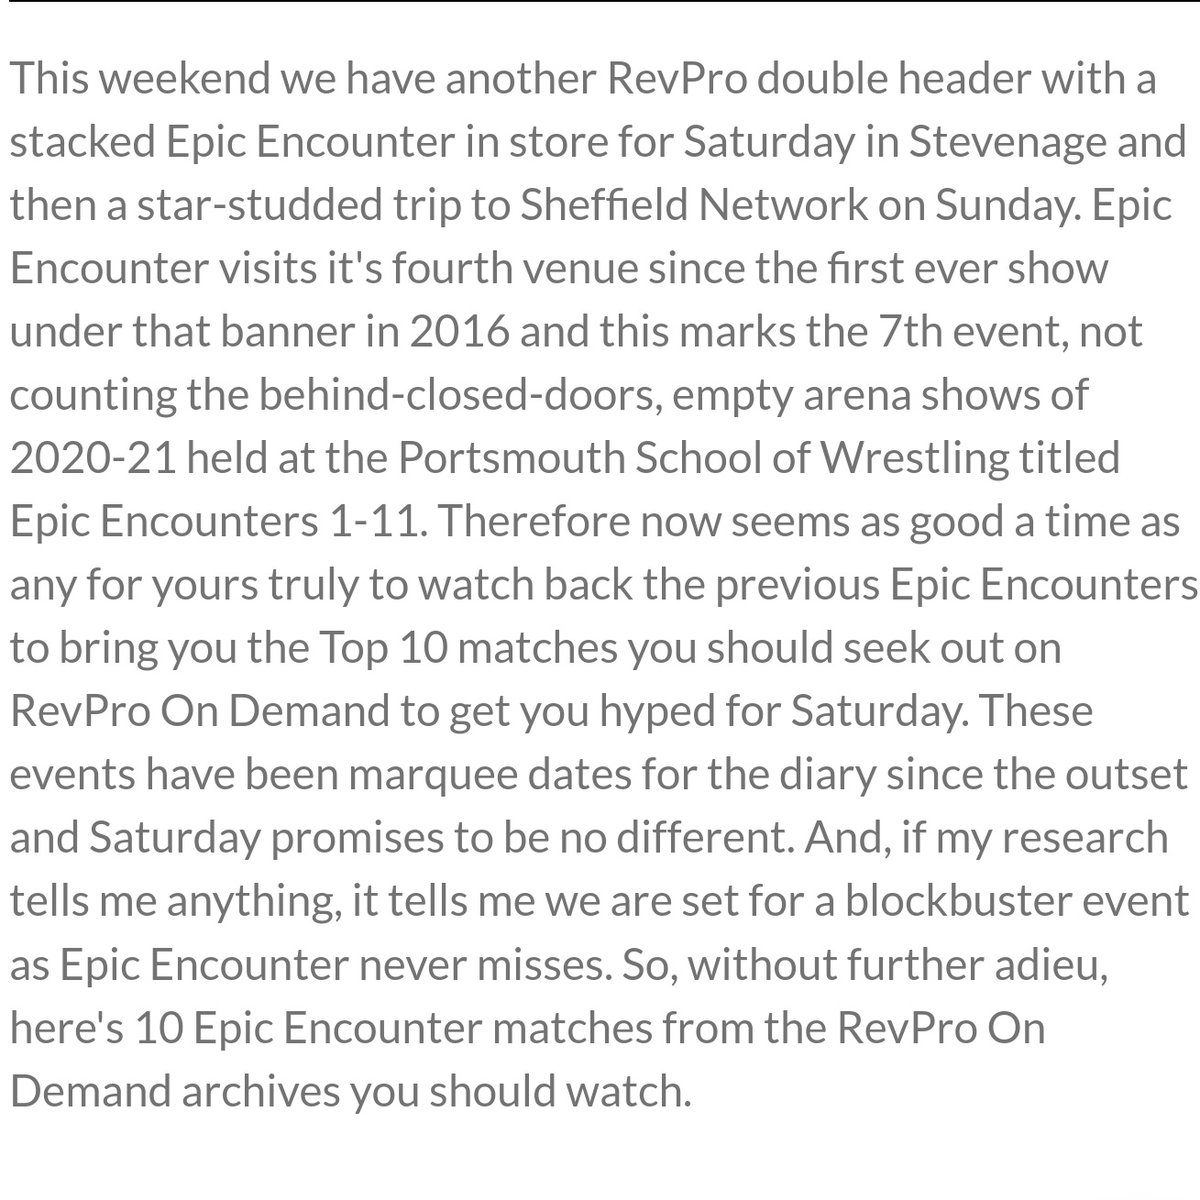 Saturday is Epic Encounter! So what better time than now to rewatch all the Epic Encounters that revproondemand.com has to offer to find you the 10 best matches to get you hyped! How many have you seen or were there live for? Get in touch: Mark Out davethemark.com/lists-about-wr…